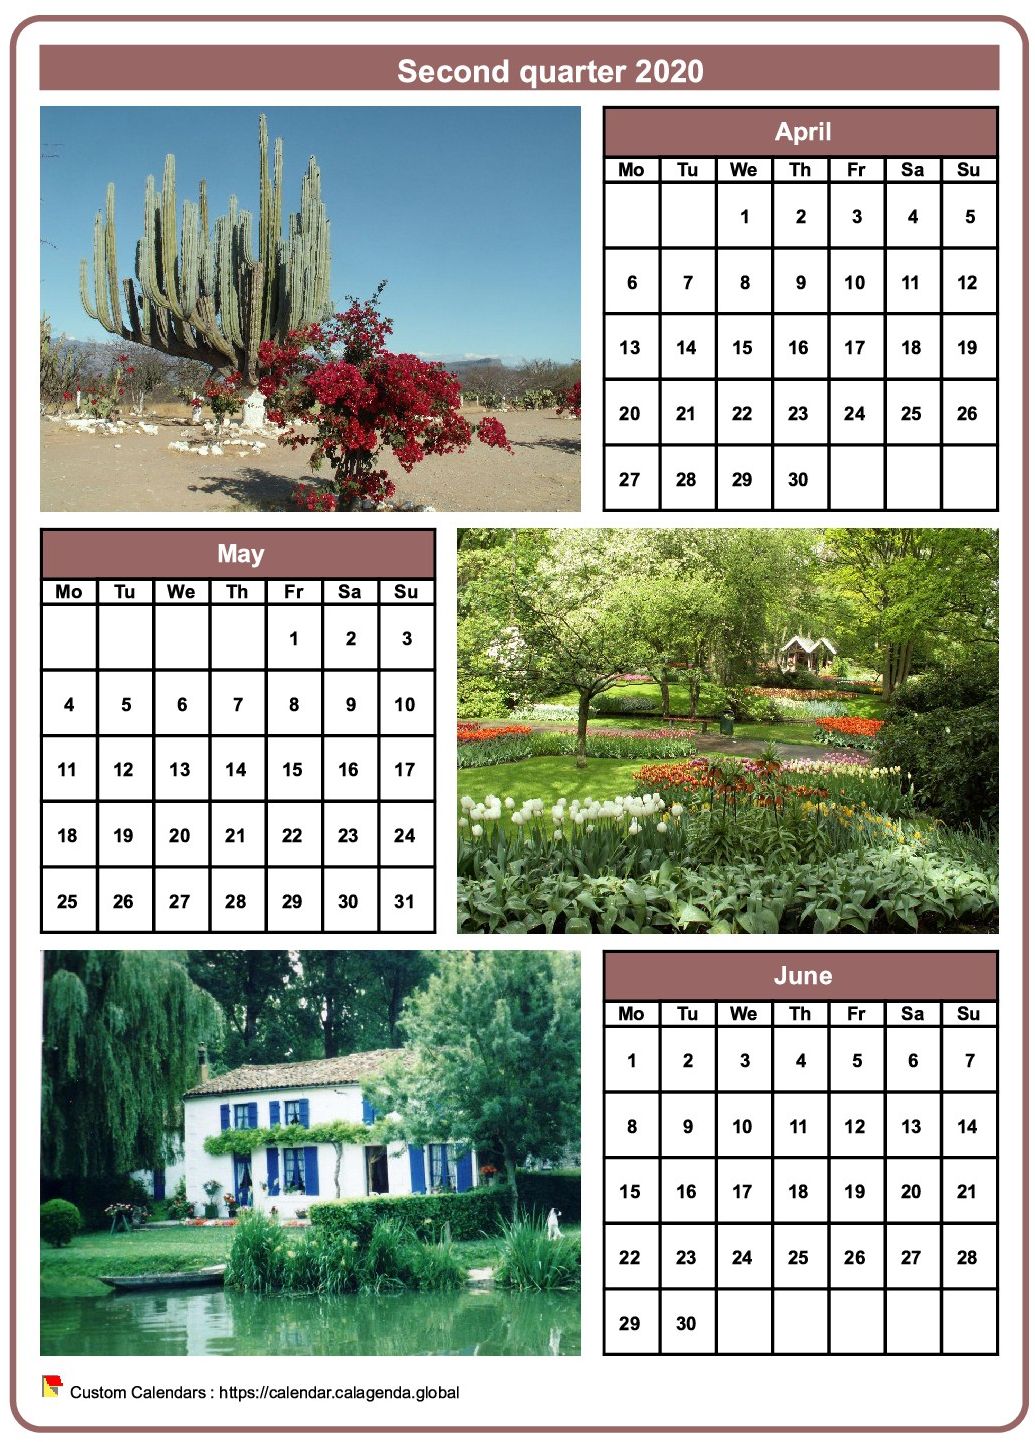 Calendar 2020 quarterly with a different photo every month